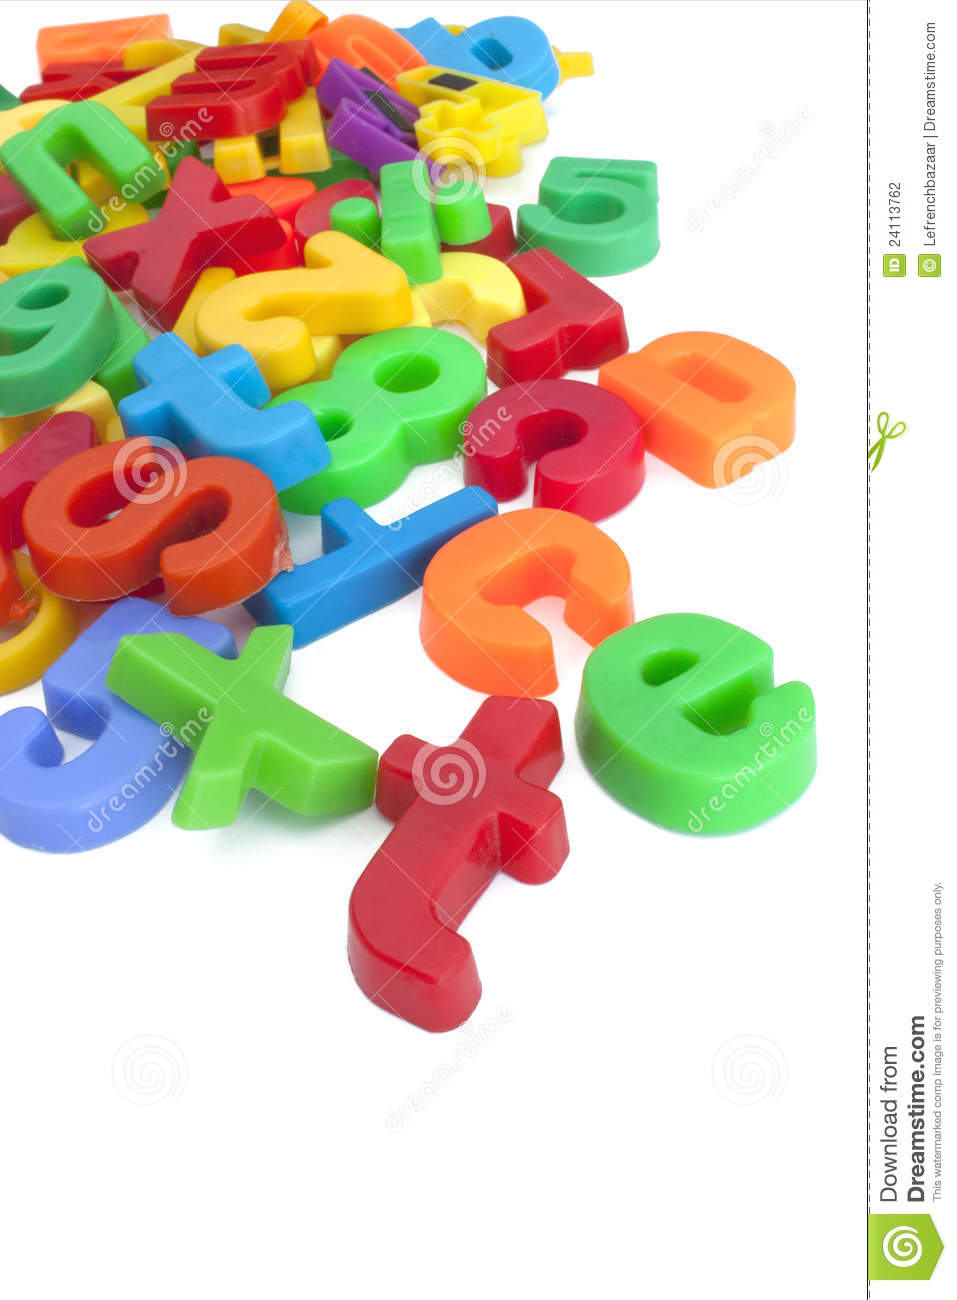 Magnetic Letters And Numbers Stock Photography.